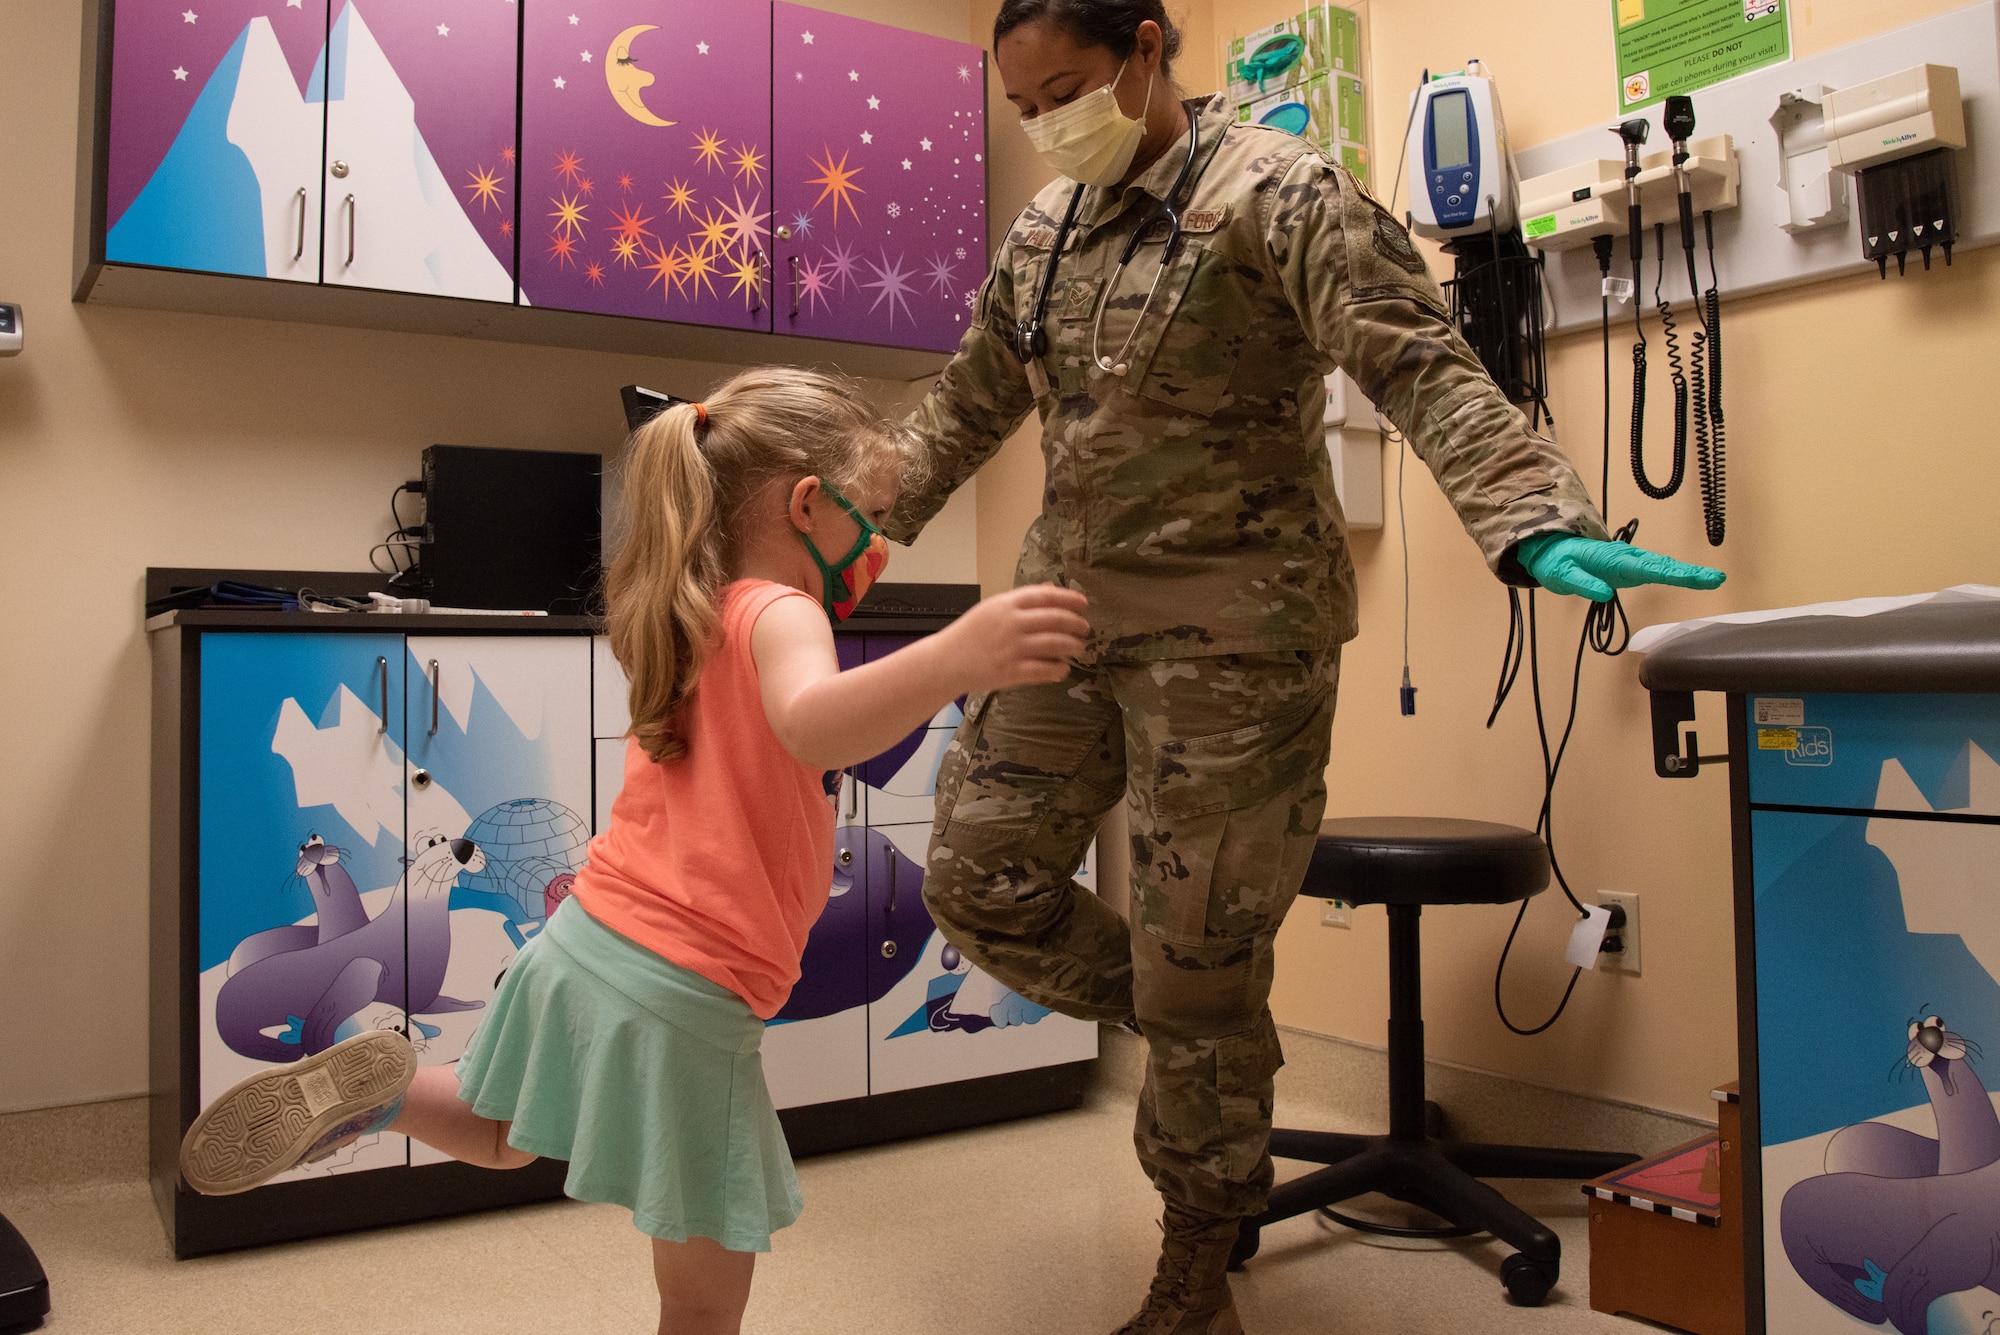 U.S. Air Force Senior Airman Julia Vallejo, 375th Health Care Operations Squadron Pediatrics Clinic aerospace medical technician, leads the patient through a balance test on Scott Air Force Base, Illinois, June 28, 2021. Vallejo used the test to gauge motor performance in the patient. (U.S. Air Force photo by Airman 1st Class Stephanie Henry)